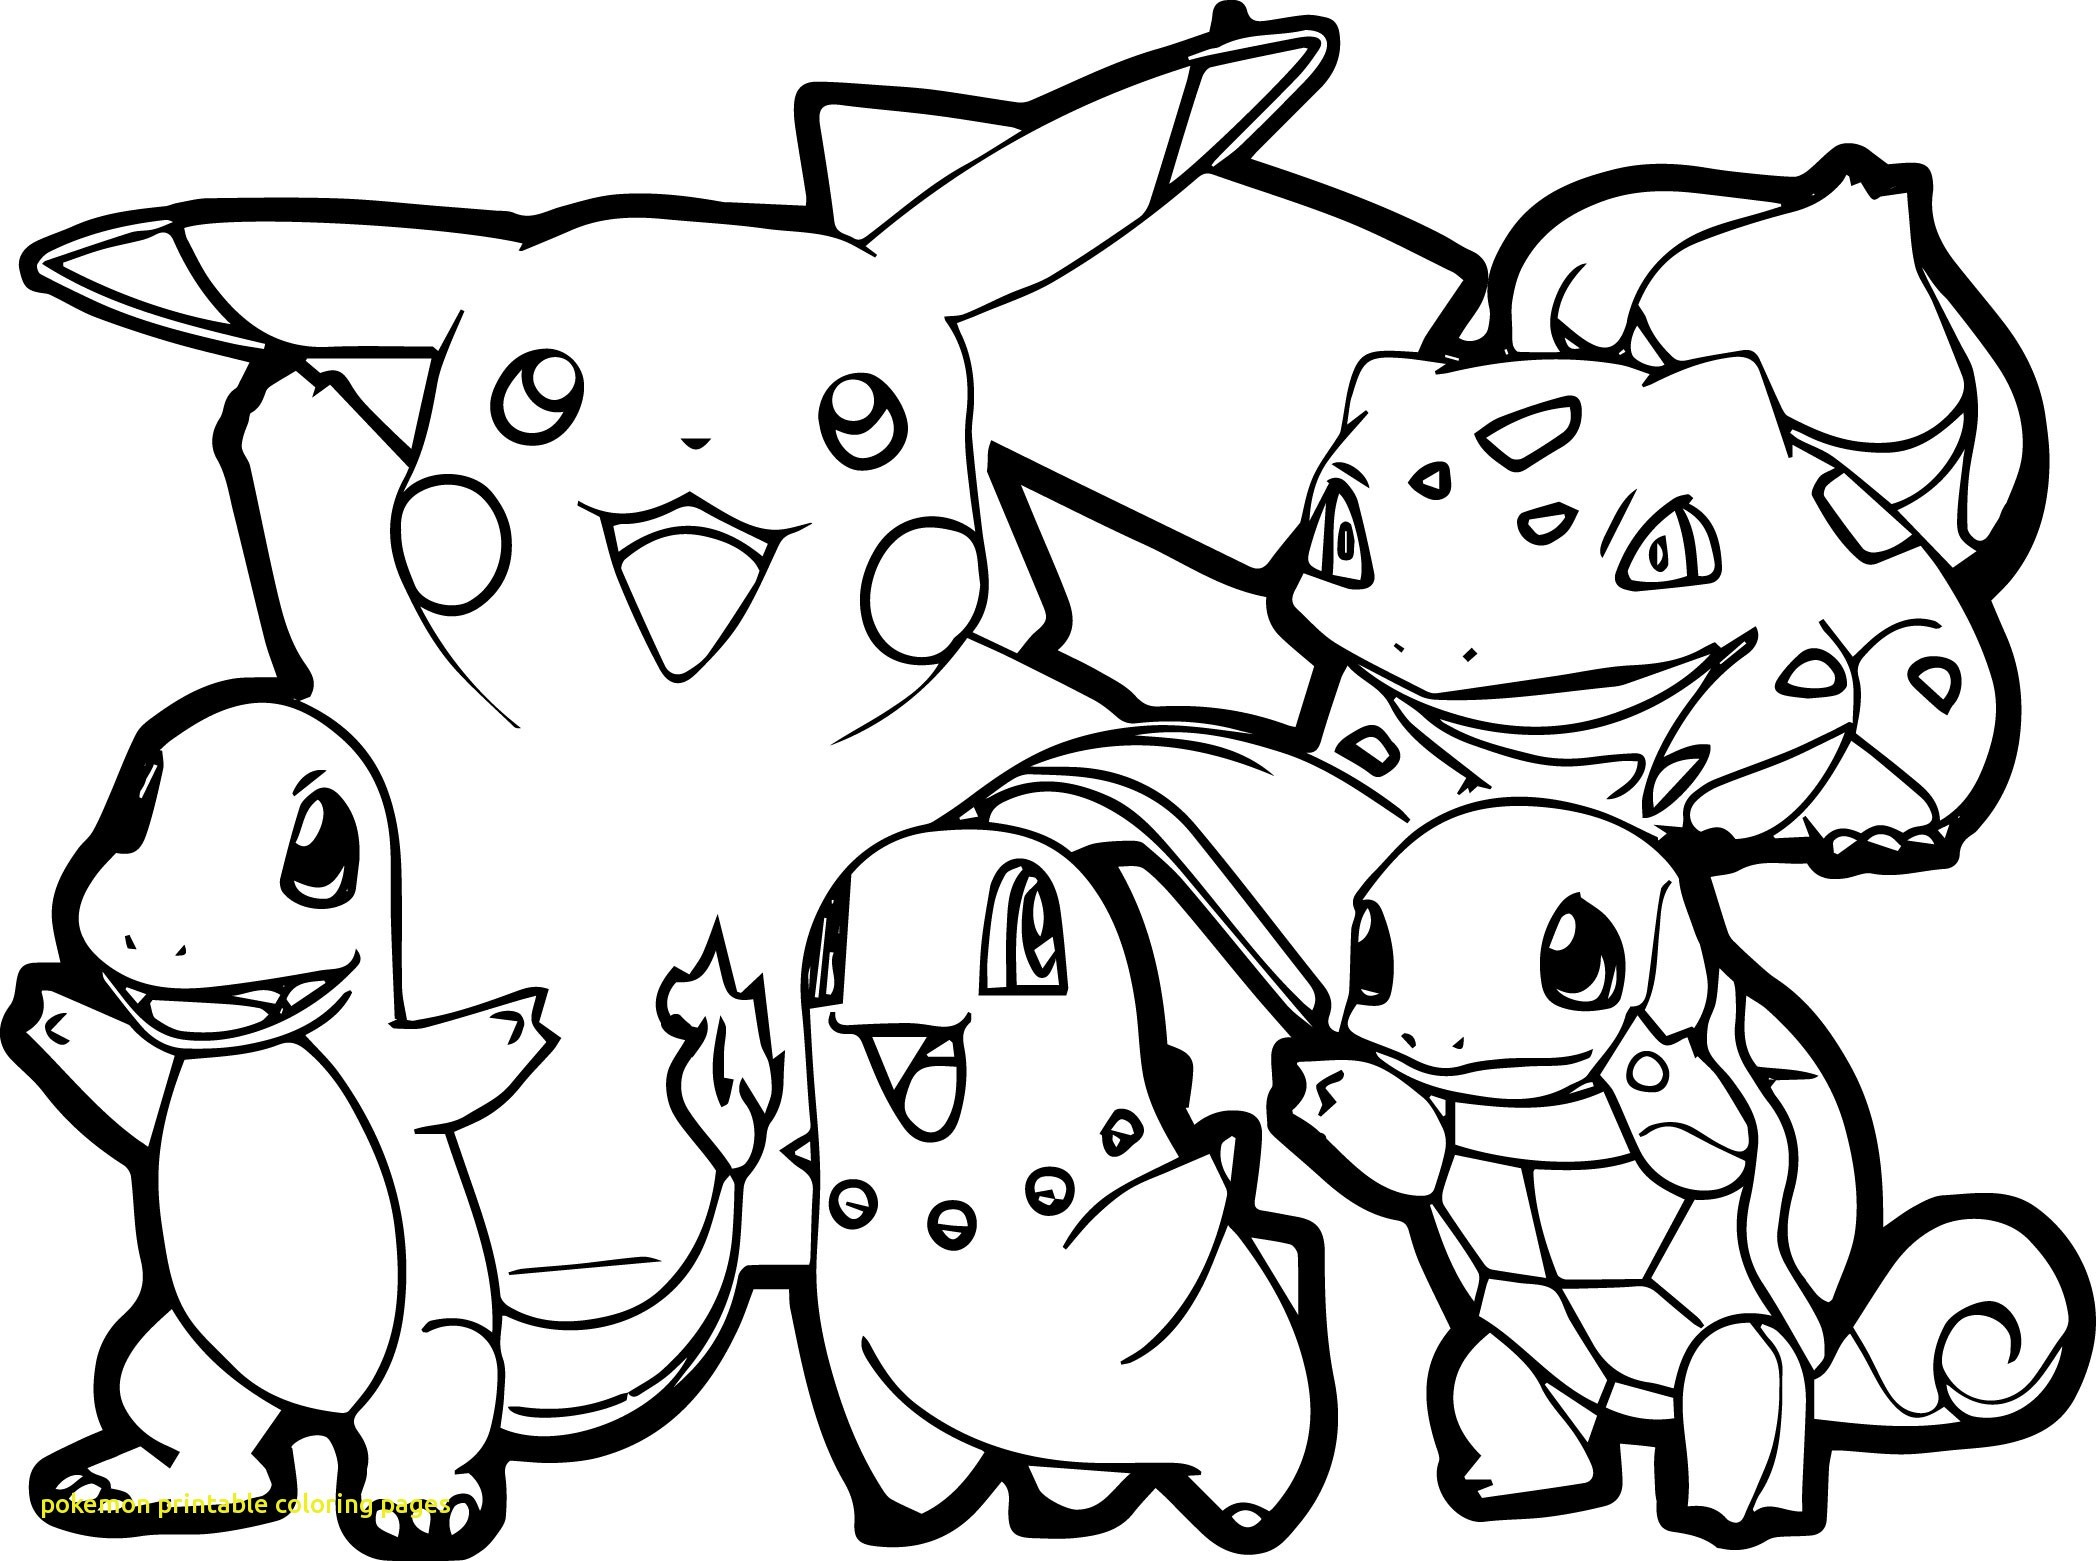 Charizard Coloring Pages Coloring Pages Excelent Pokemon Coloring Pages Pikachu Charizard